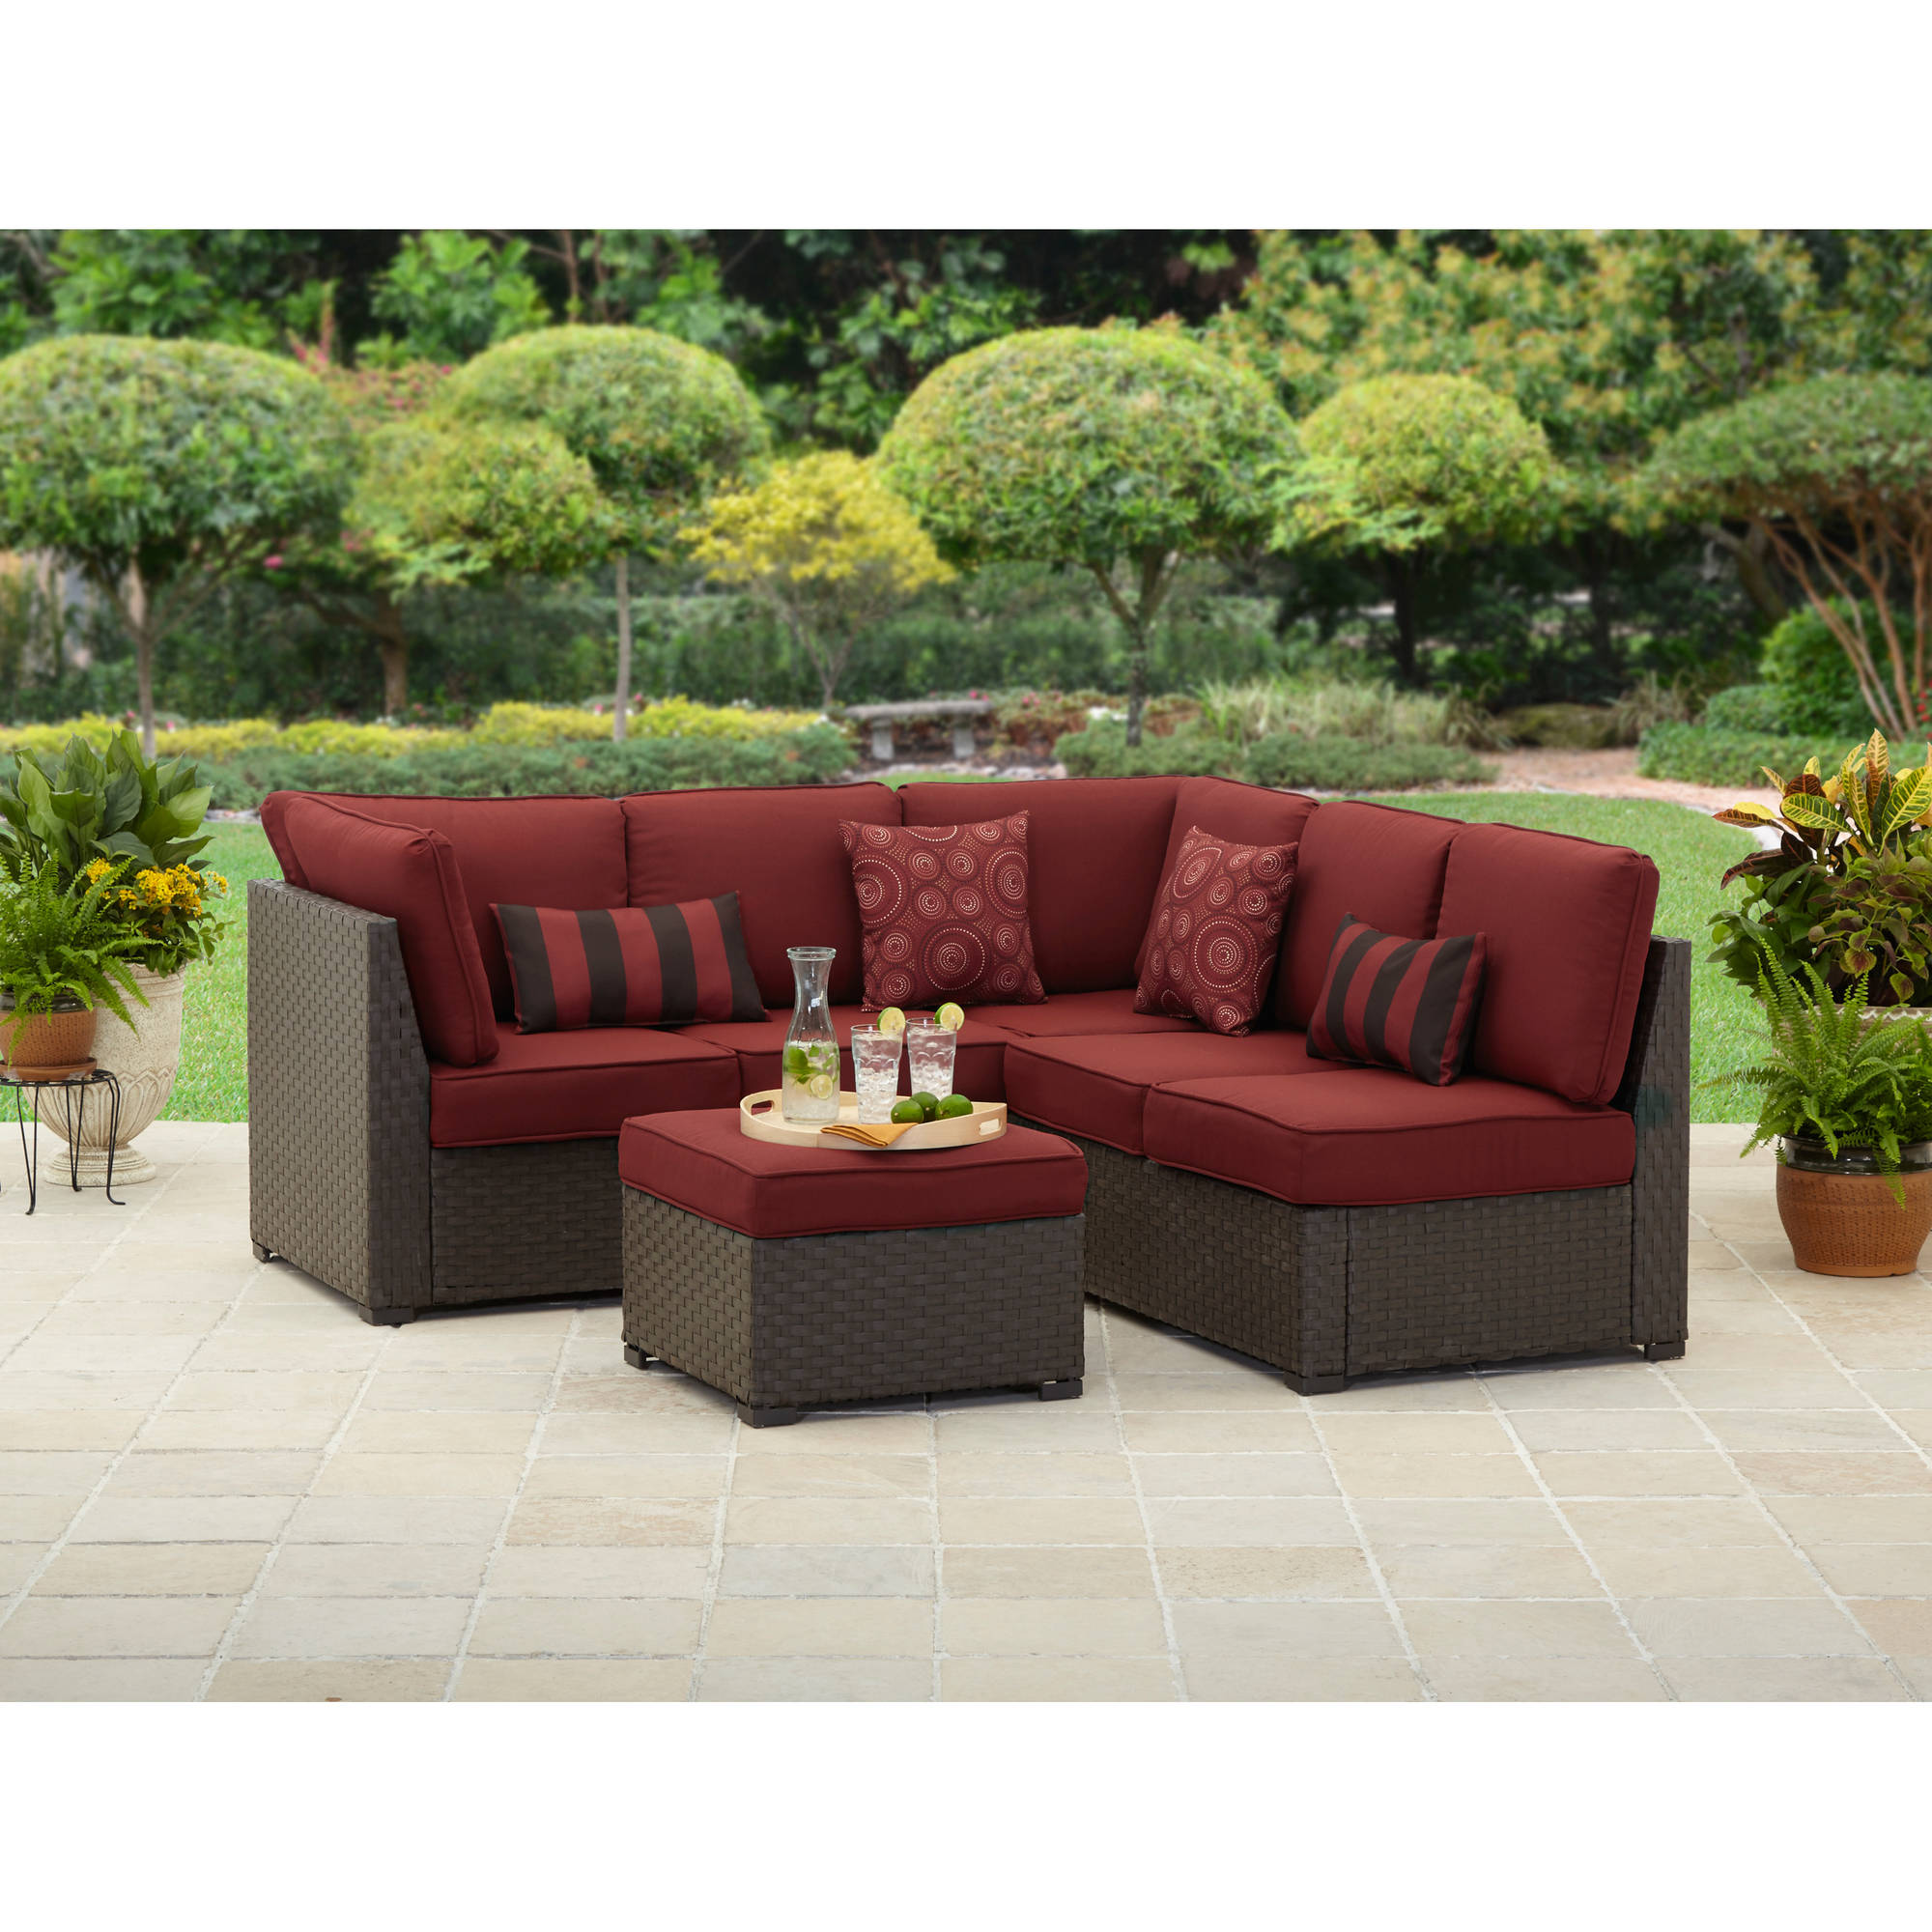 better homes and gardens rush valley 3-piece outdoor sectional sofa set,  seats 5 TUMFBIH